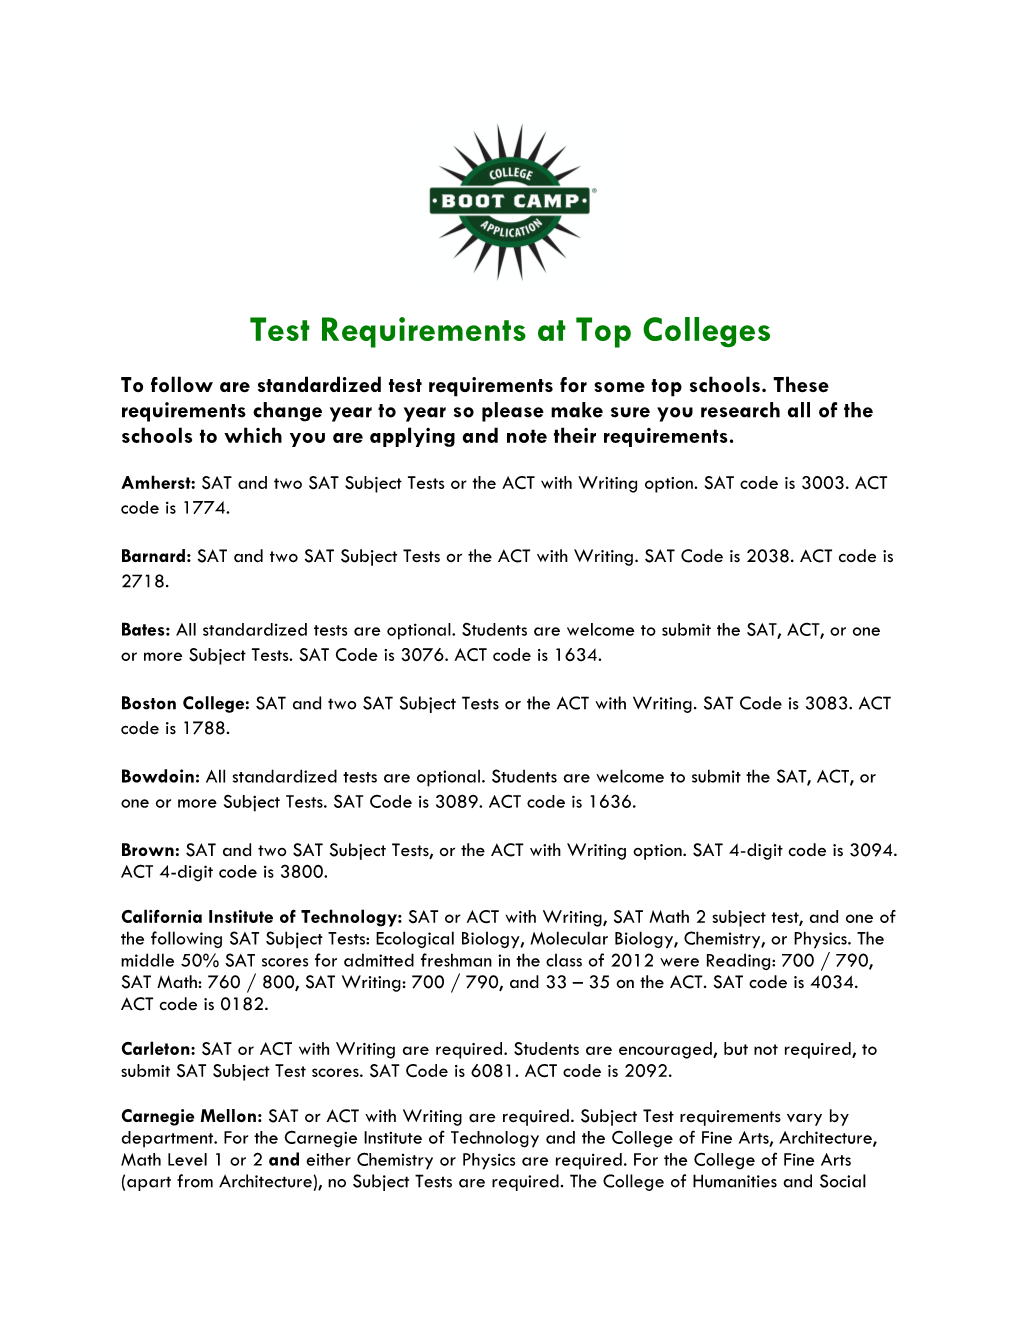 Standardized Test Requirements at Top Colleges